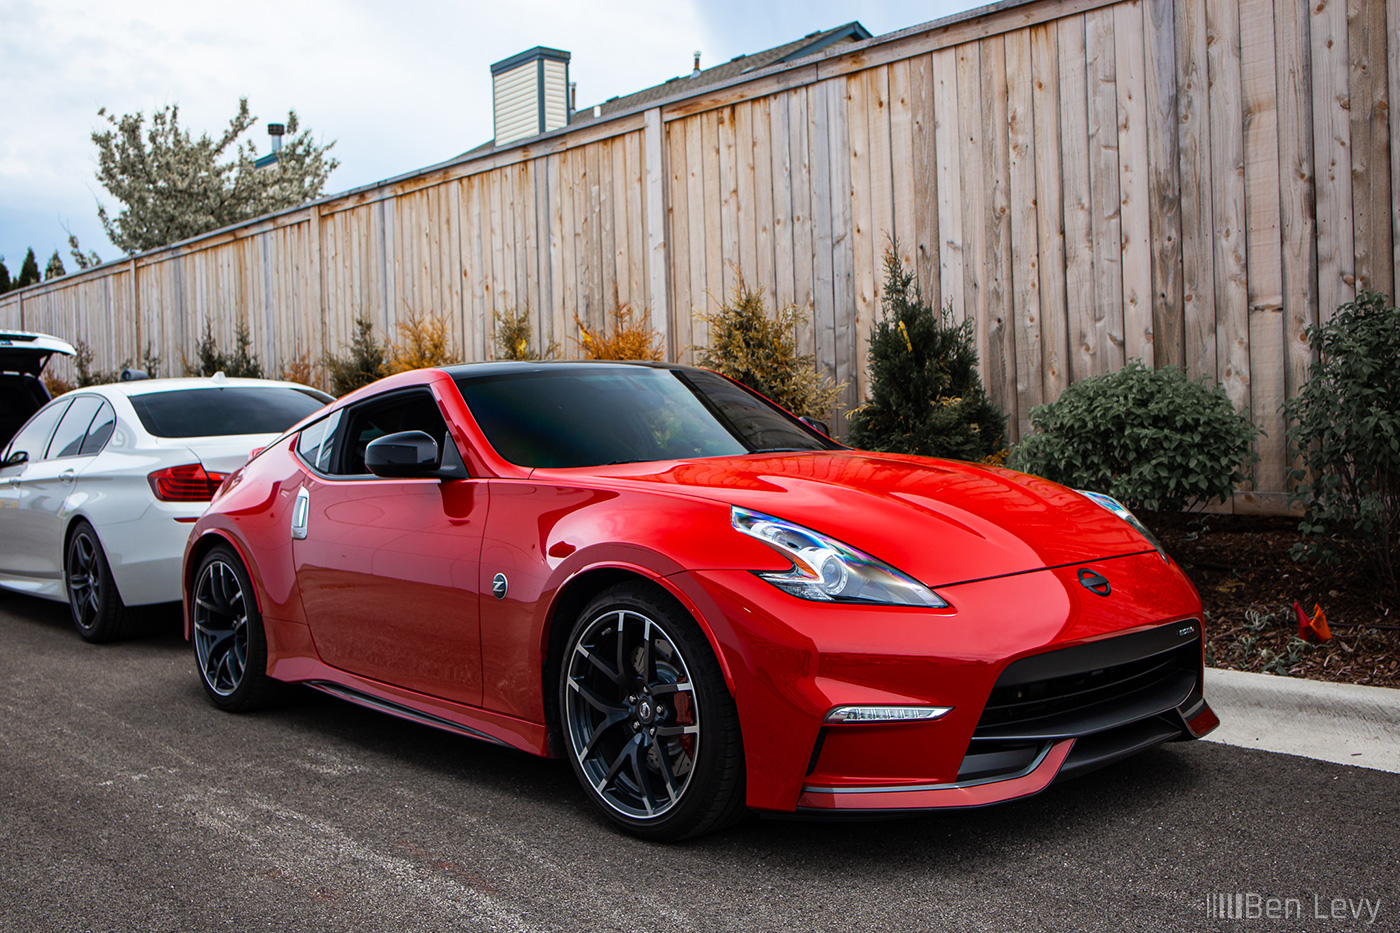 Red Nismo 370Z